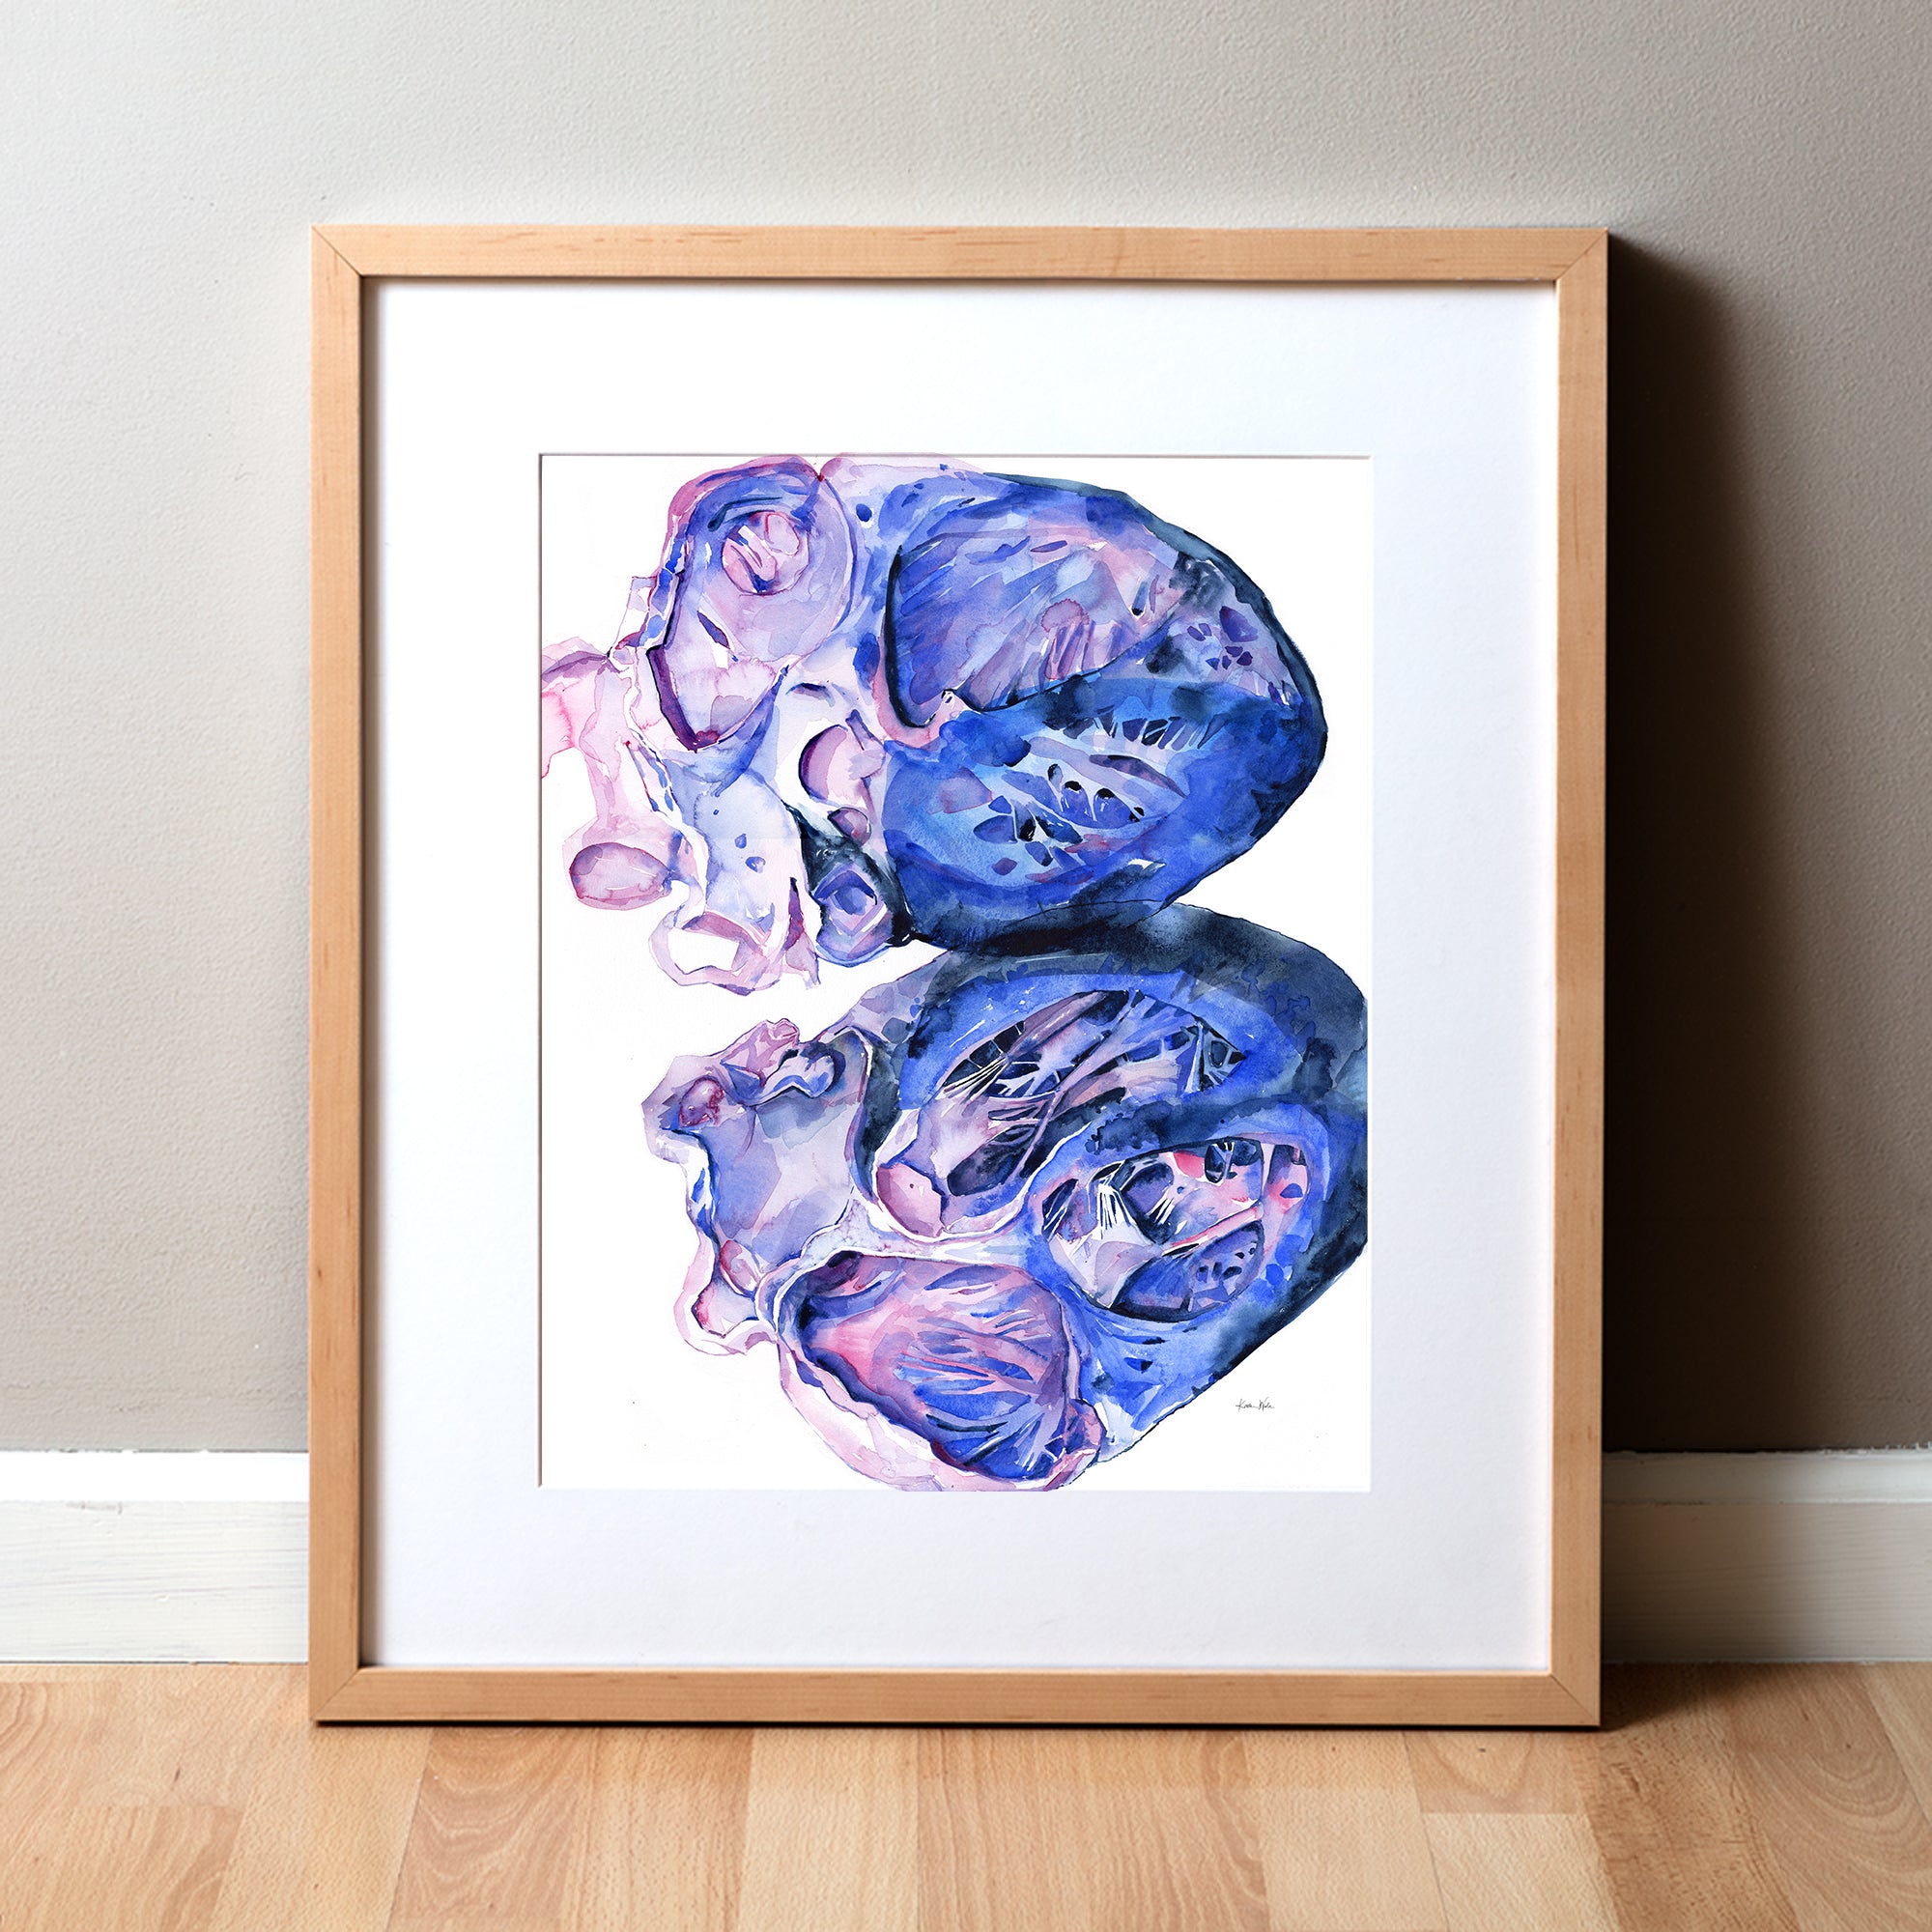 Framed watercolor painting of a heart dissection in pinks, purples, and vibrant blues.